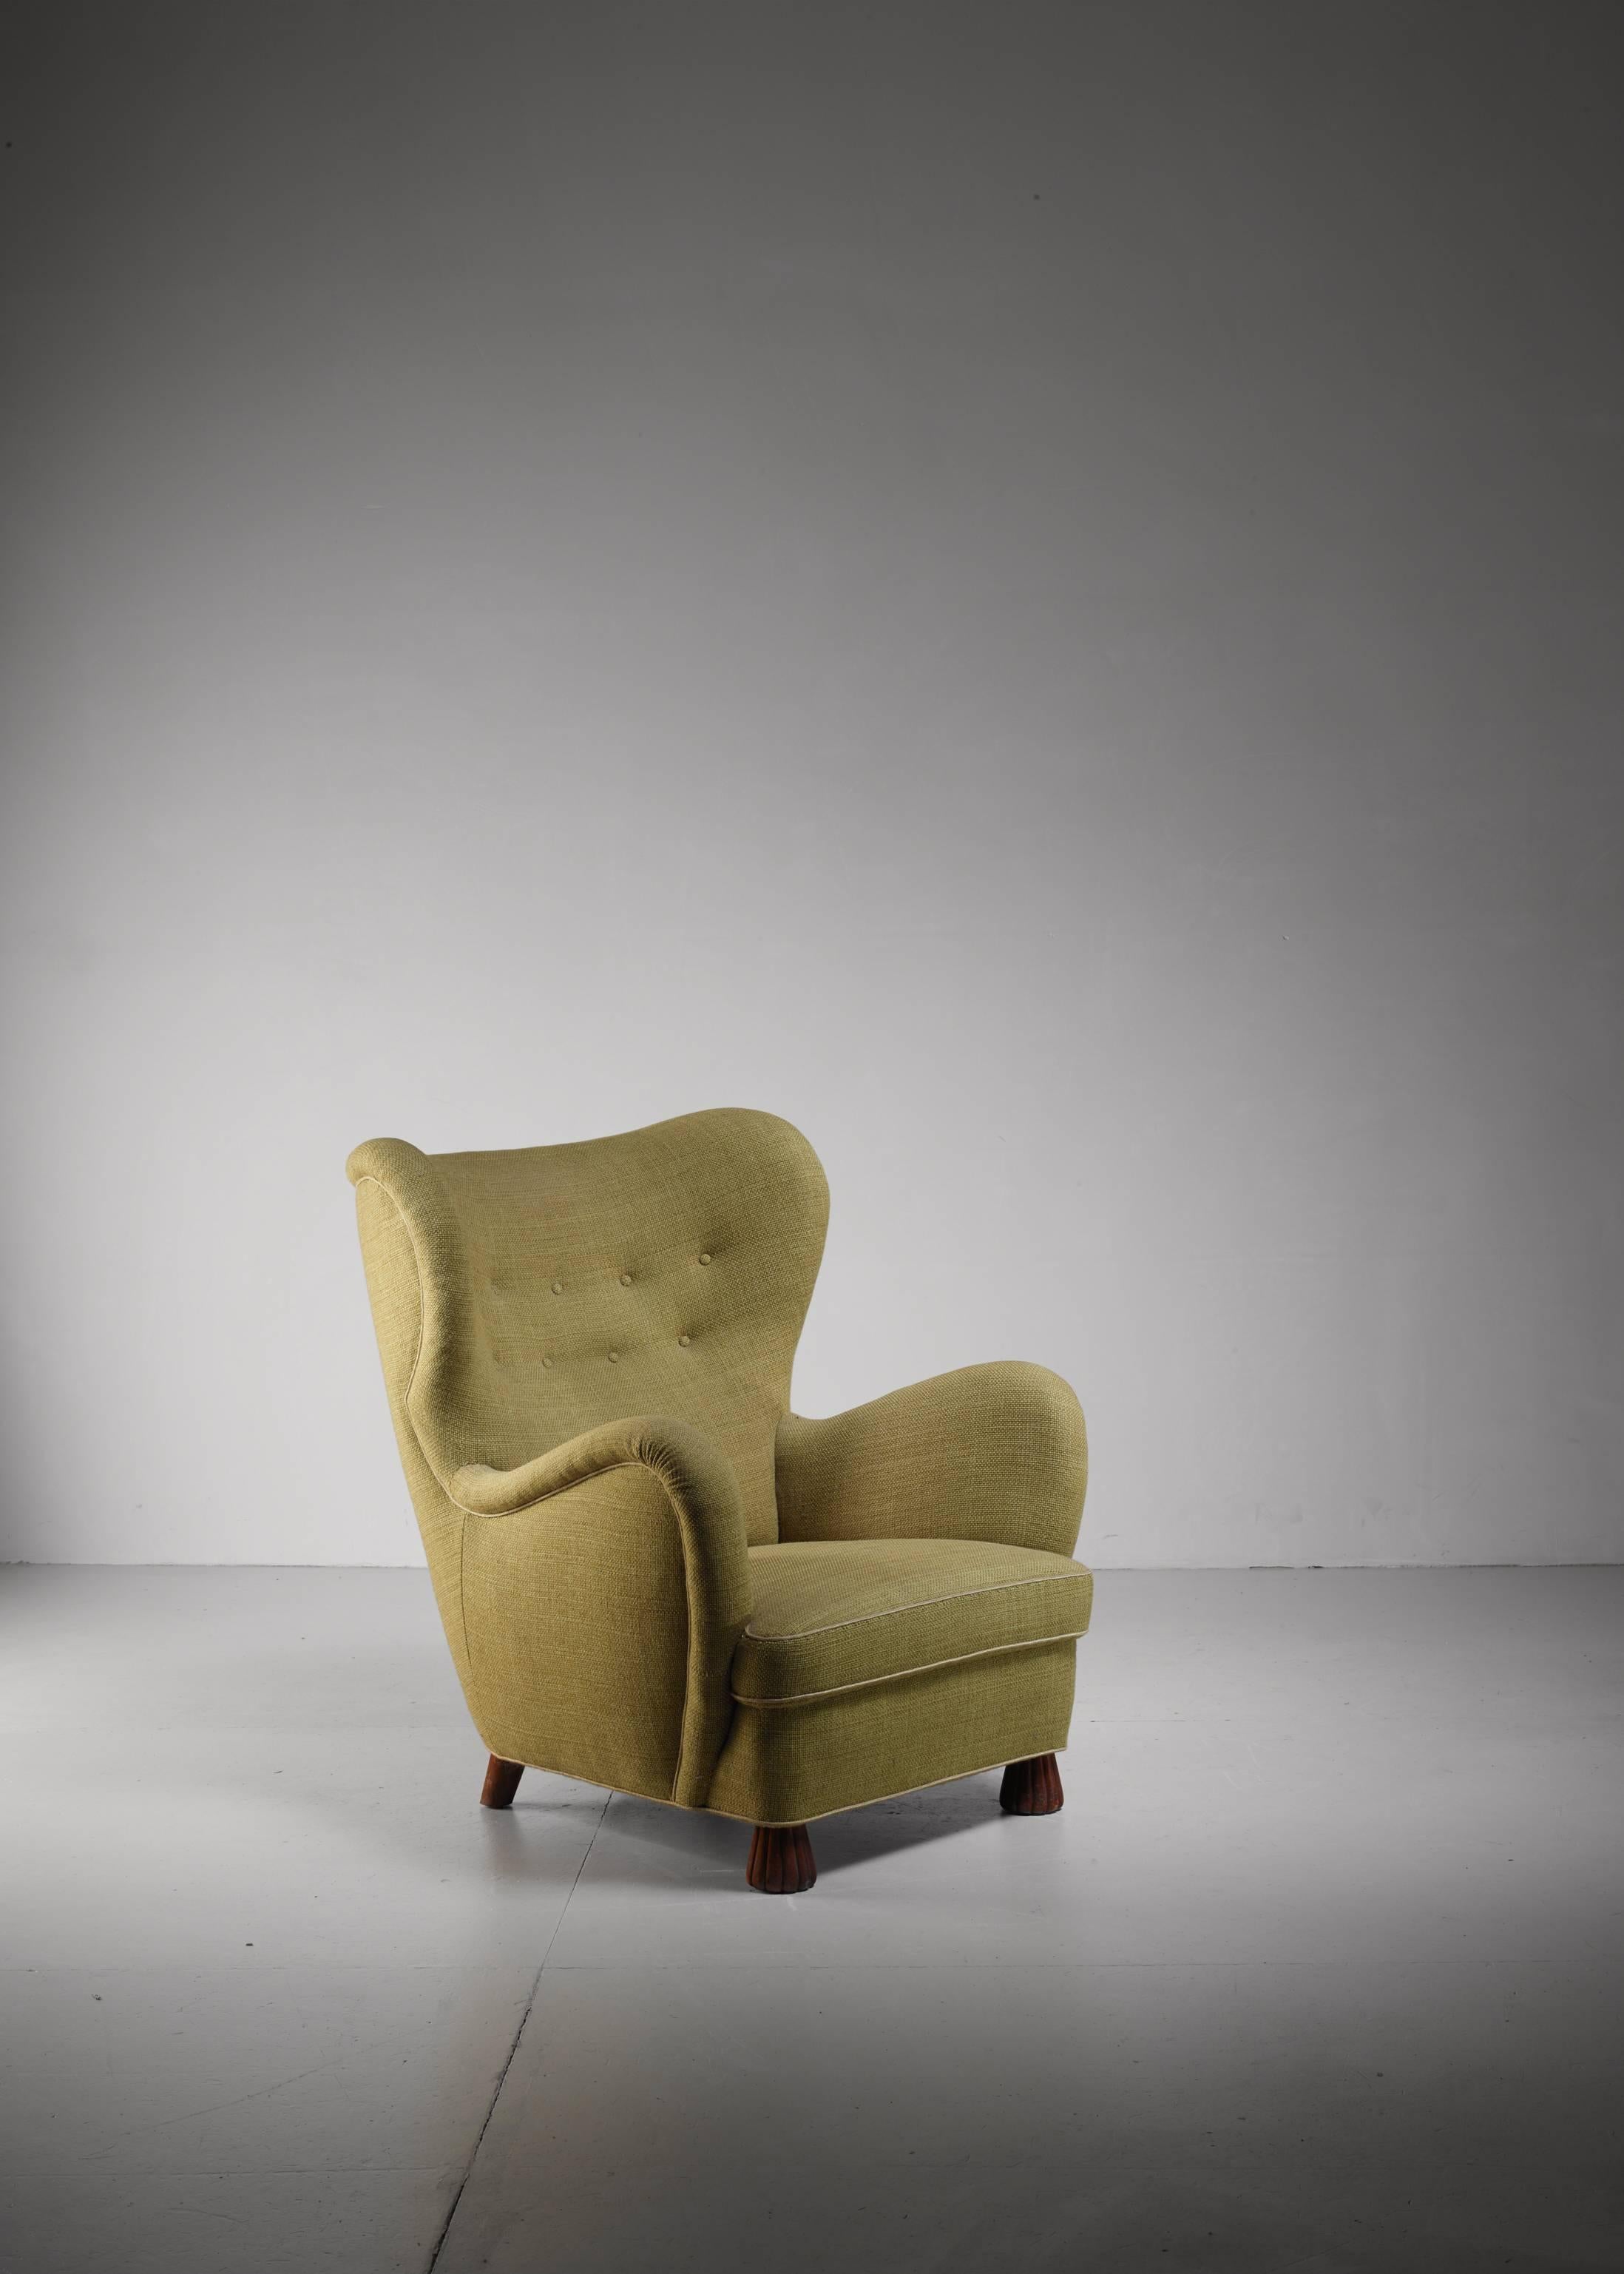 A perfect condition lounge chair designed by architect Otto Schulz for his company Boet, Gothenburg, 1930. Beautiful moss green upholstery in an excellent condition.